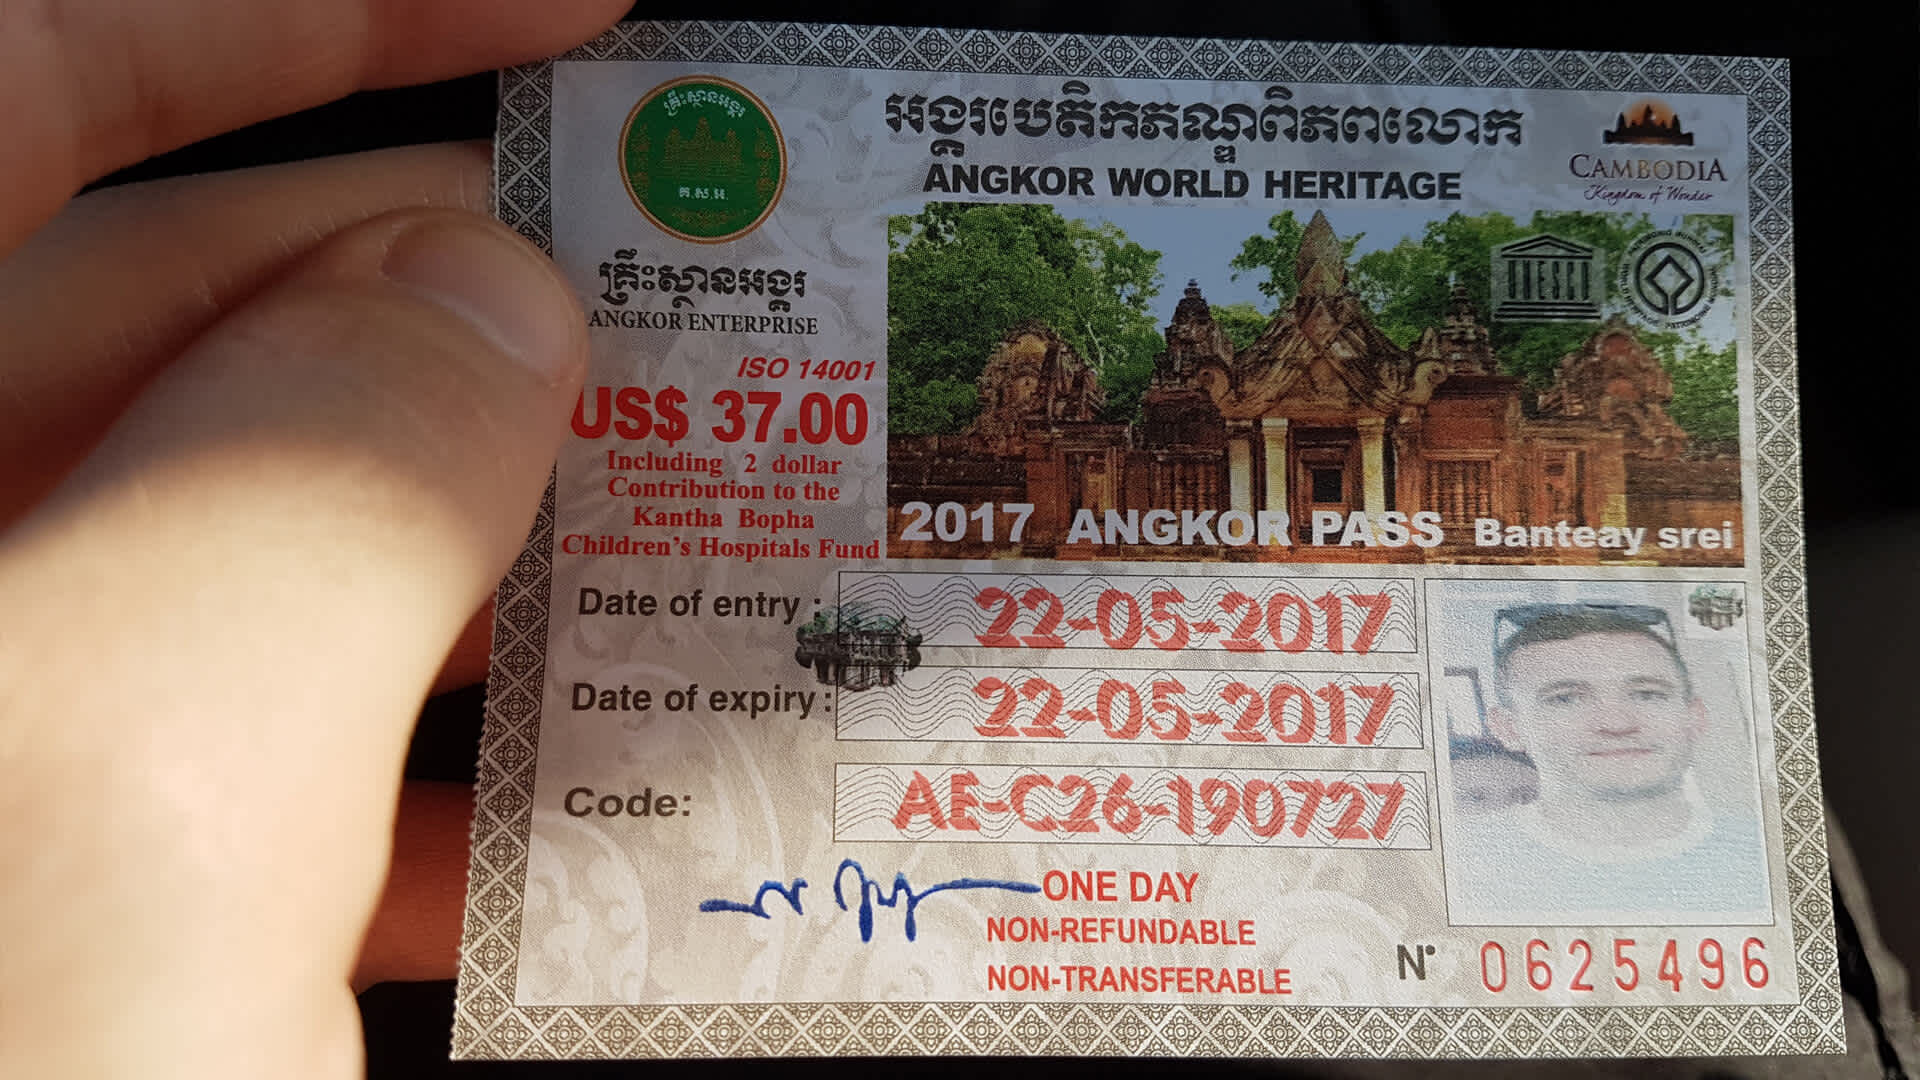 Angkor World Heritage - One day pass US$ 37.00 including 2 dollar contribution to the Kantha Bopha Childrens Hospitals Fund.